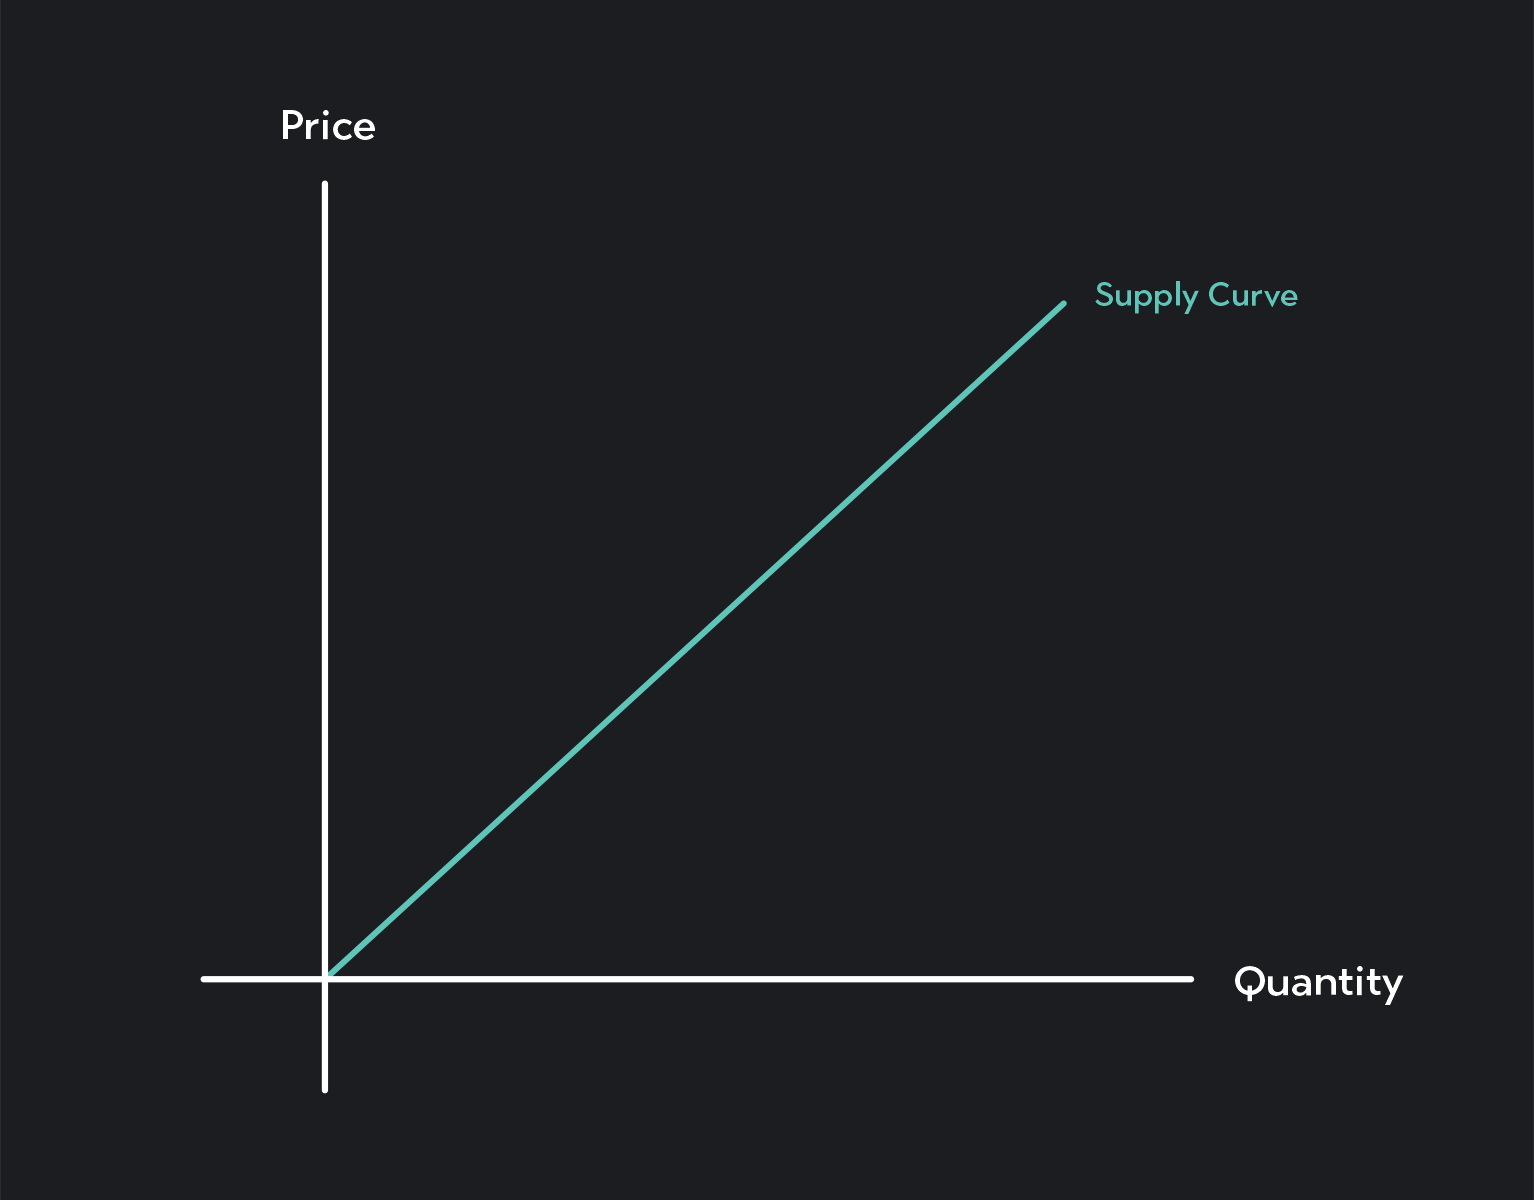 Graph showing the supply curve